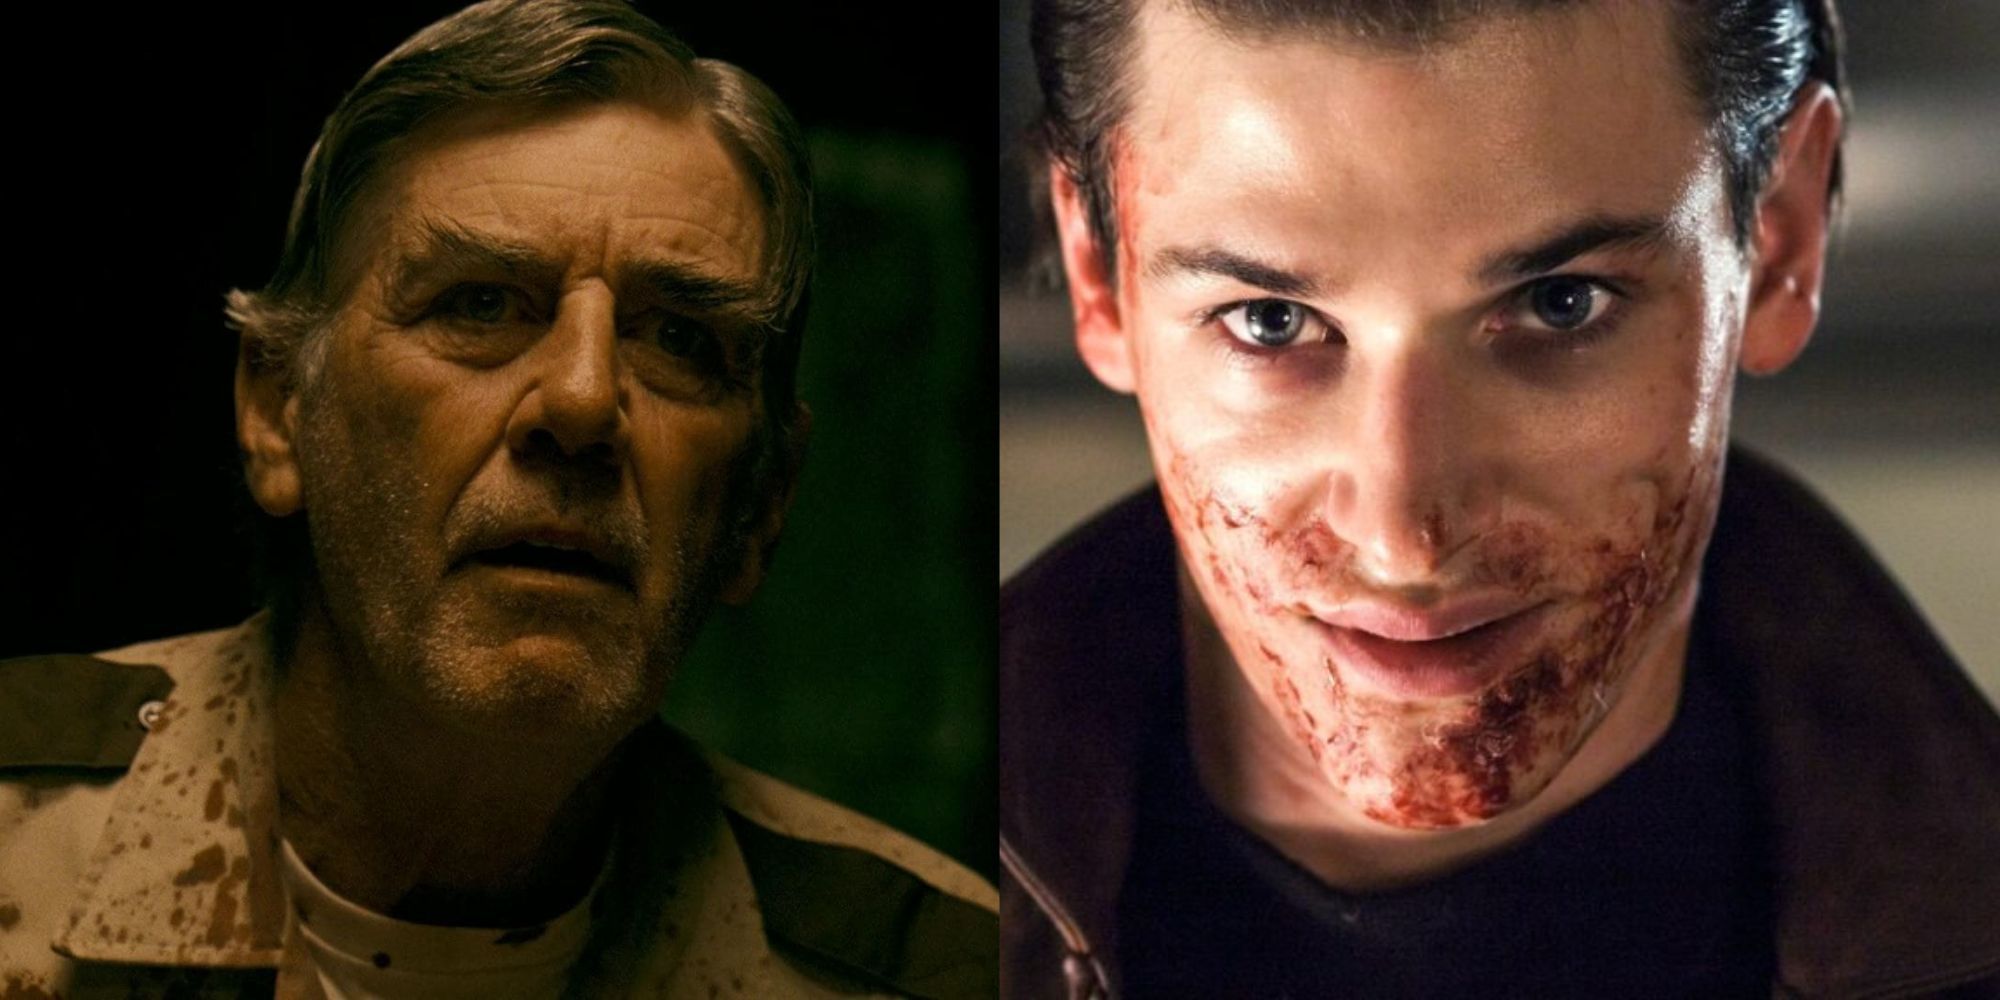 TCM The Beginning and Hannibal: Rising